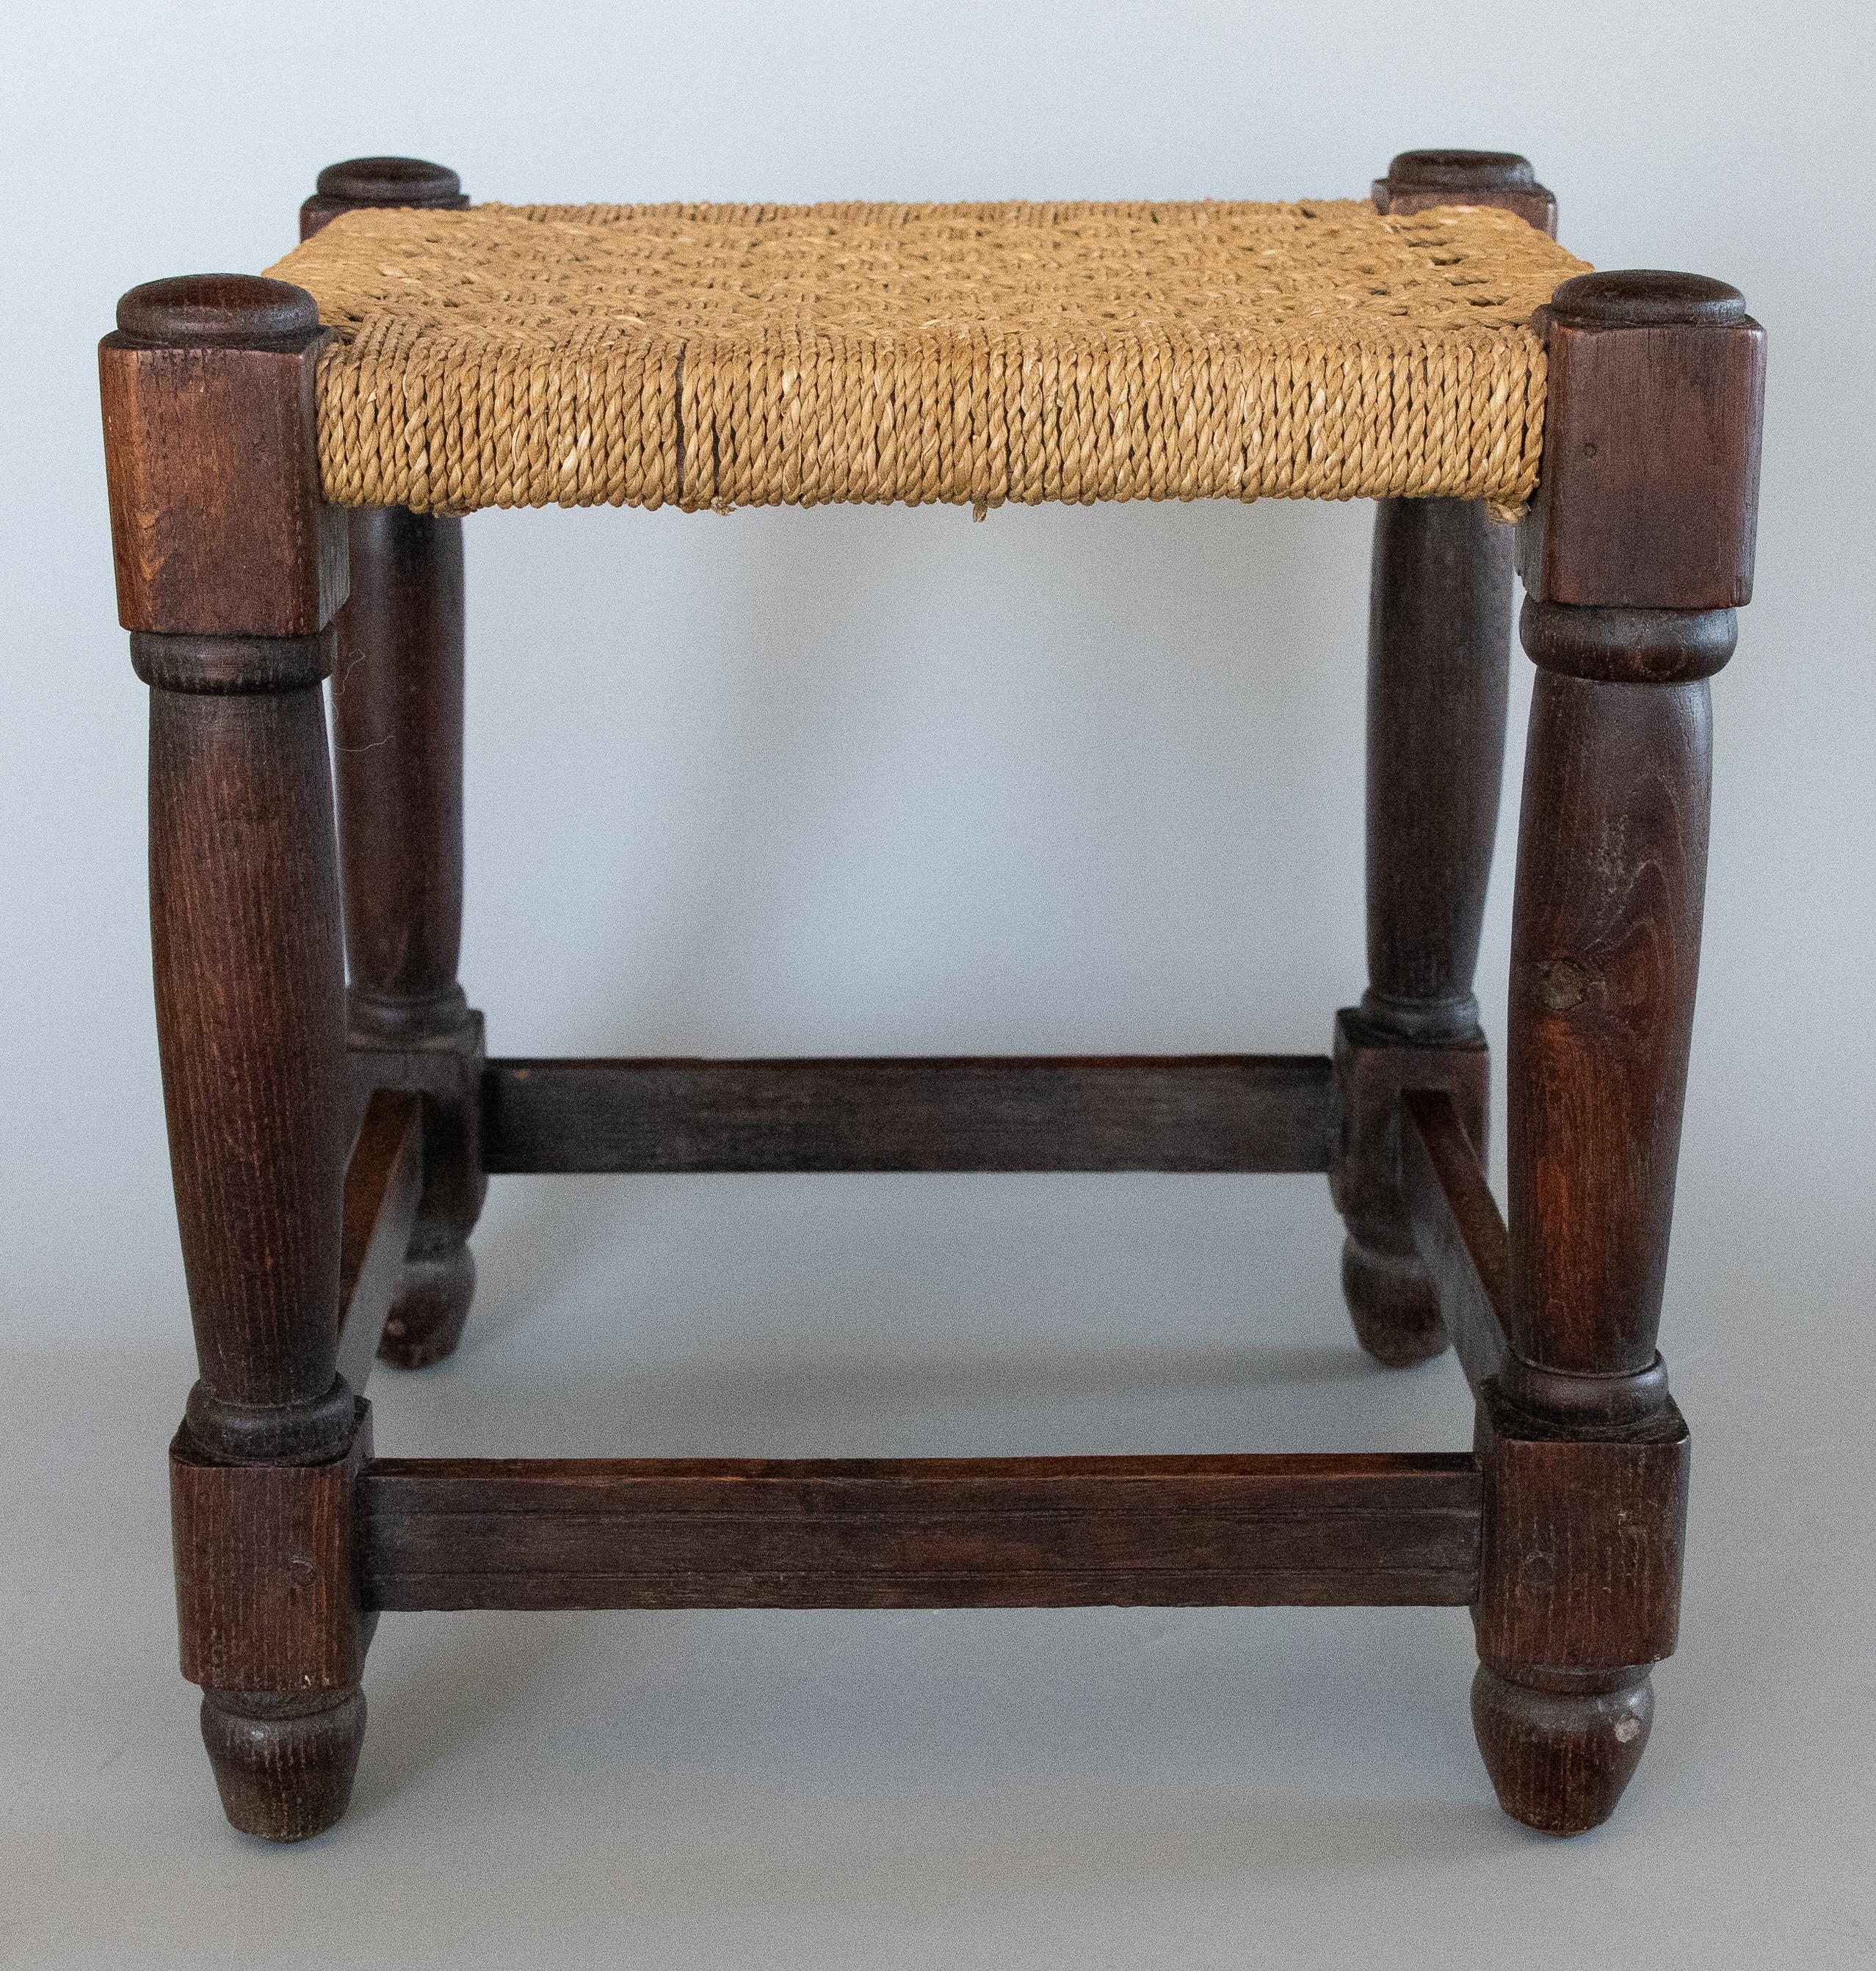 Antique English Oak Woven Cord Rope Stool Footstool, circa 1900 In Good Condition For Sale In Pearland, TX